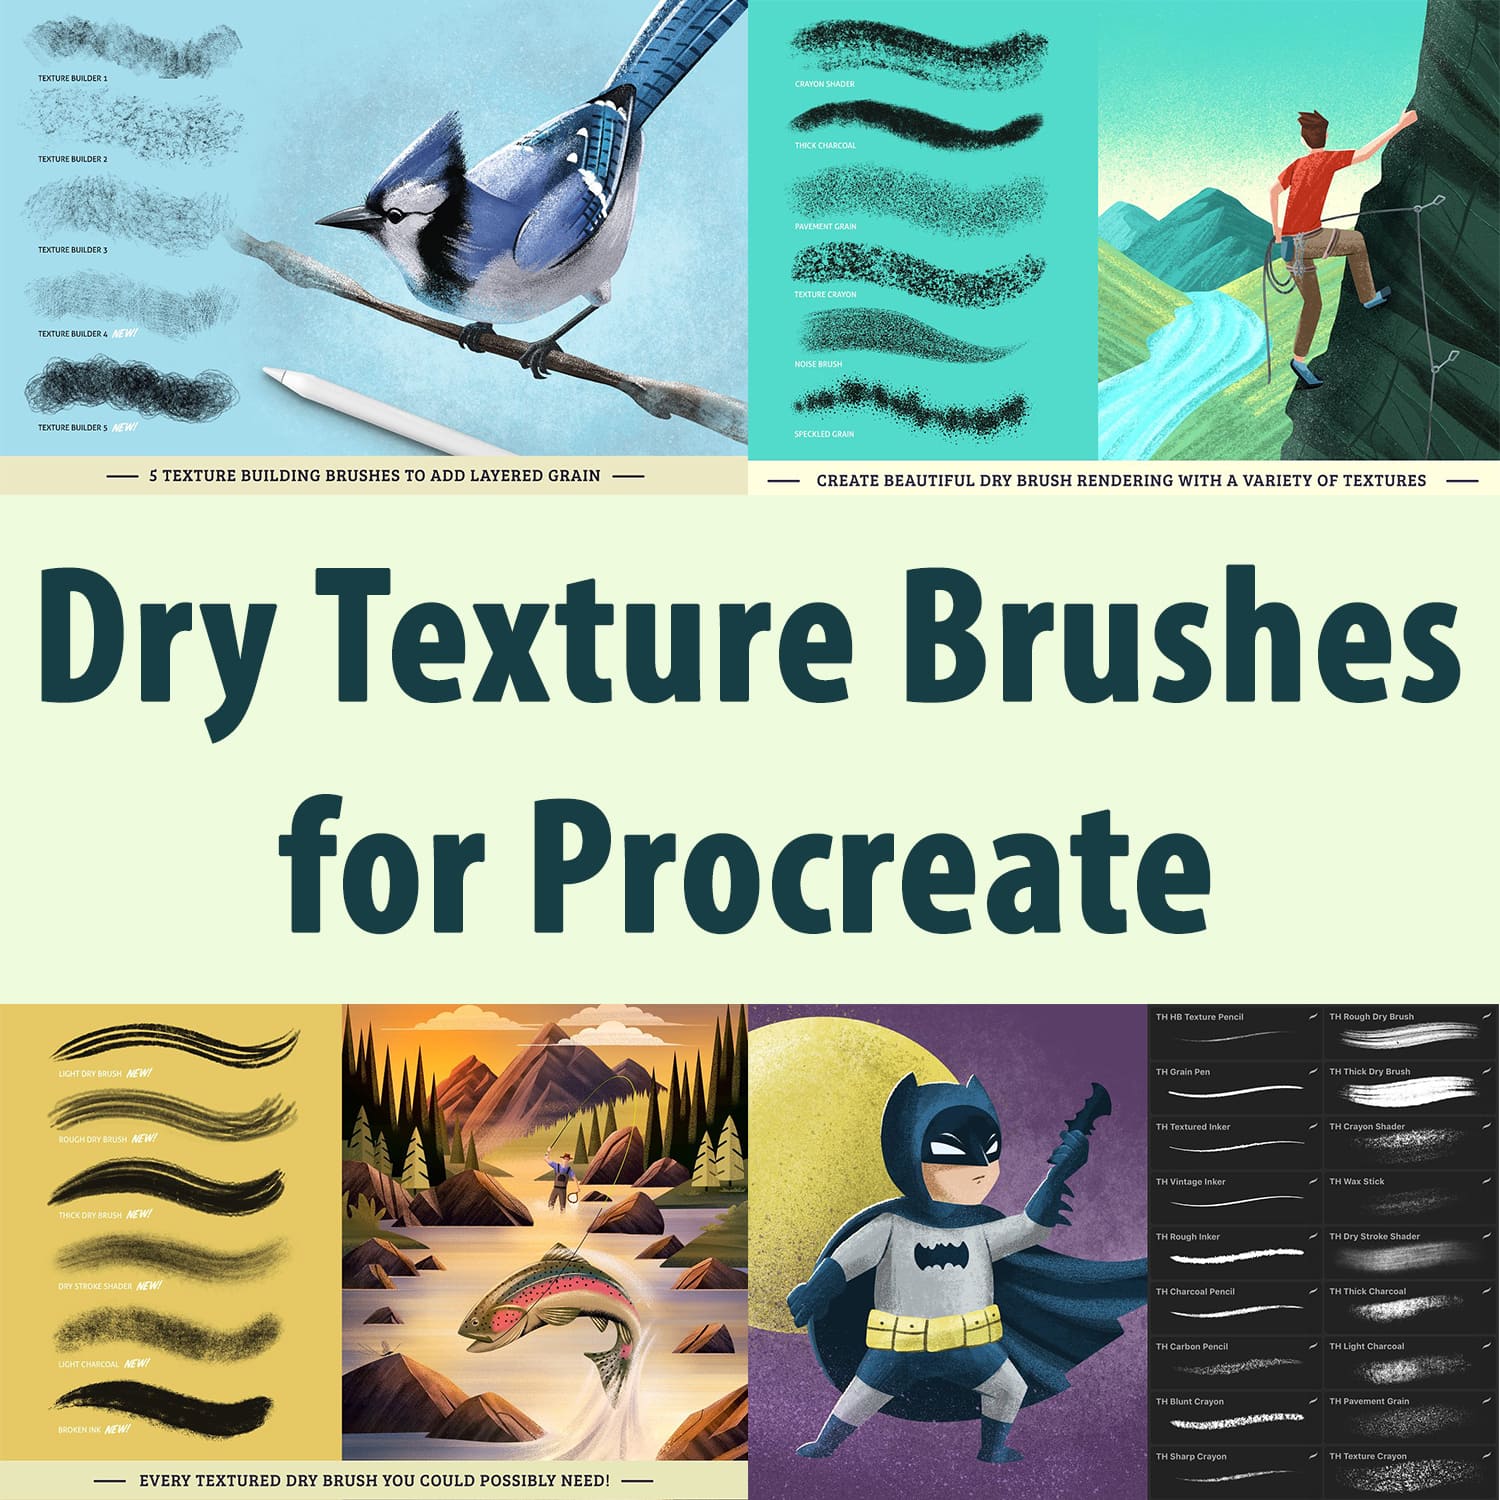 Dry Texture Brushes for Procreate main cover.